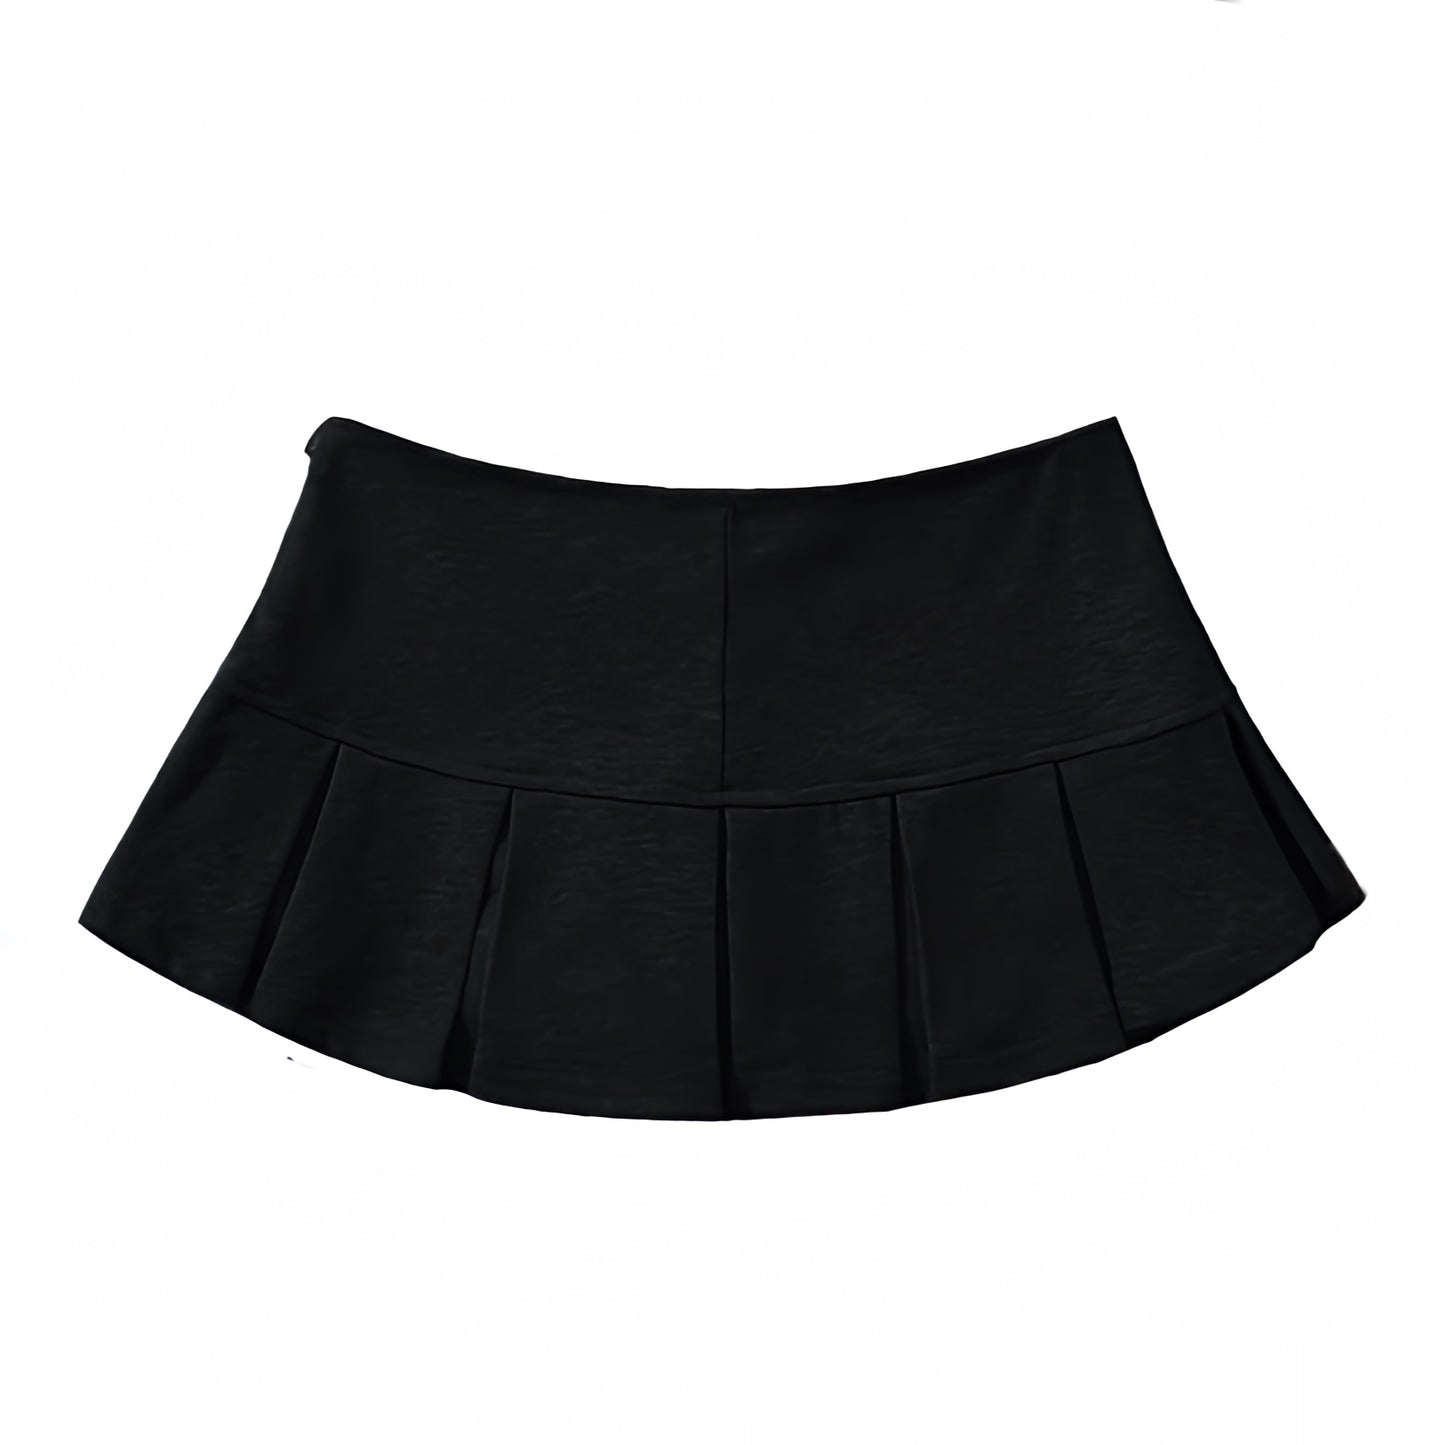 black-slim-fit-pleated-low-rise-waisted-mini-micro-skirt-skort-with-shorts-women-ladies-chic-trendy-spring-2024-summer-casual-feminine-party-date-night-out-sexy-club-wear-y2k-90s-minimalist-office-siren-style-zara-revolve-aritzia-white-fox-princess-polly-babyboo-edikted-jaded-london-brandy-melville-iamgia-areyouami